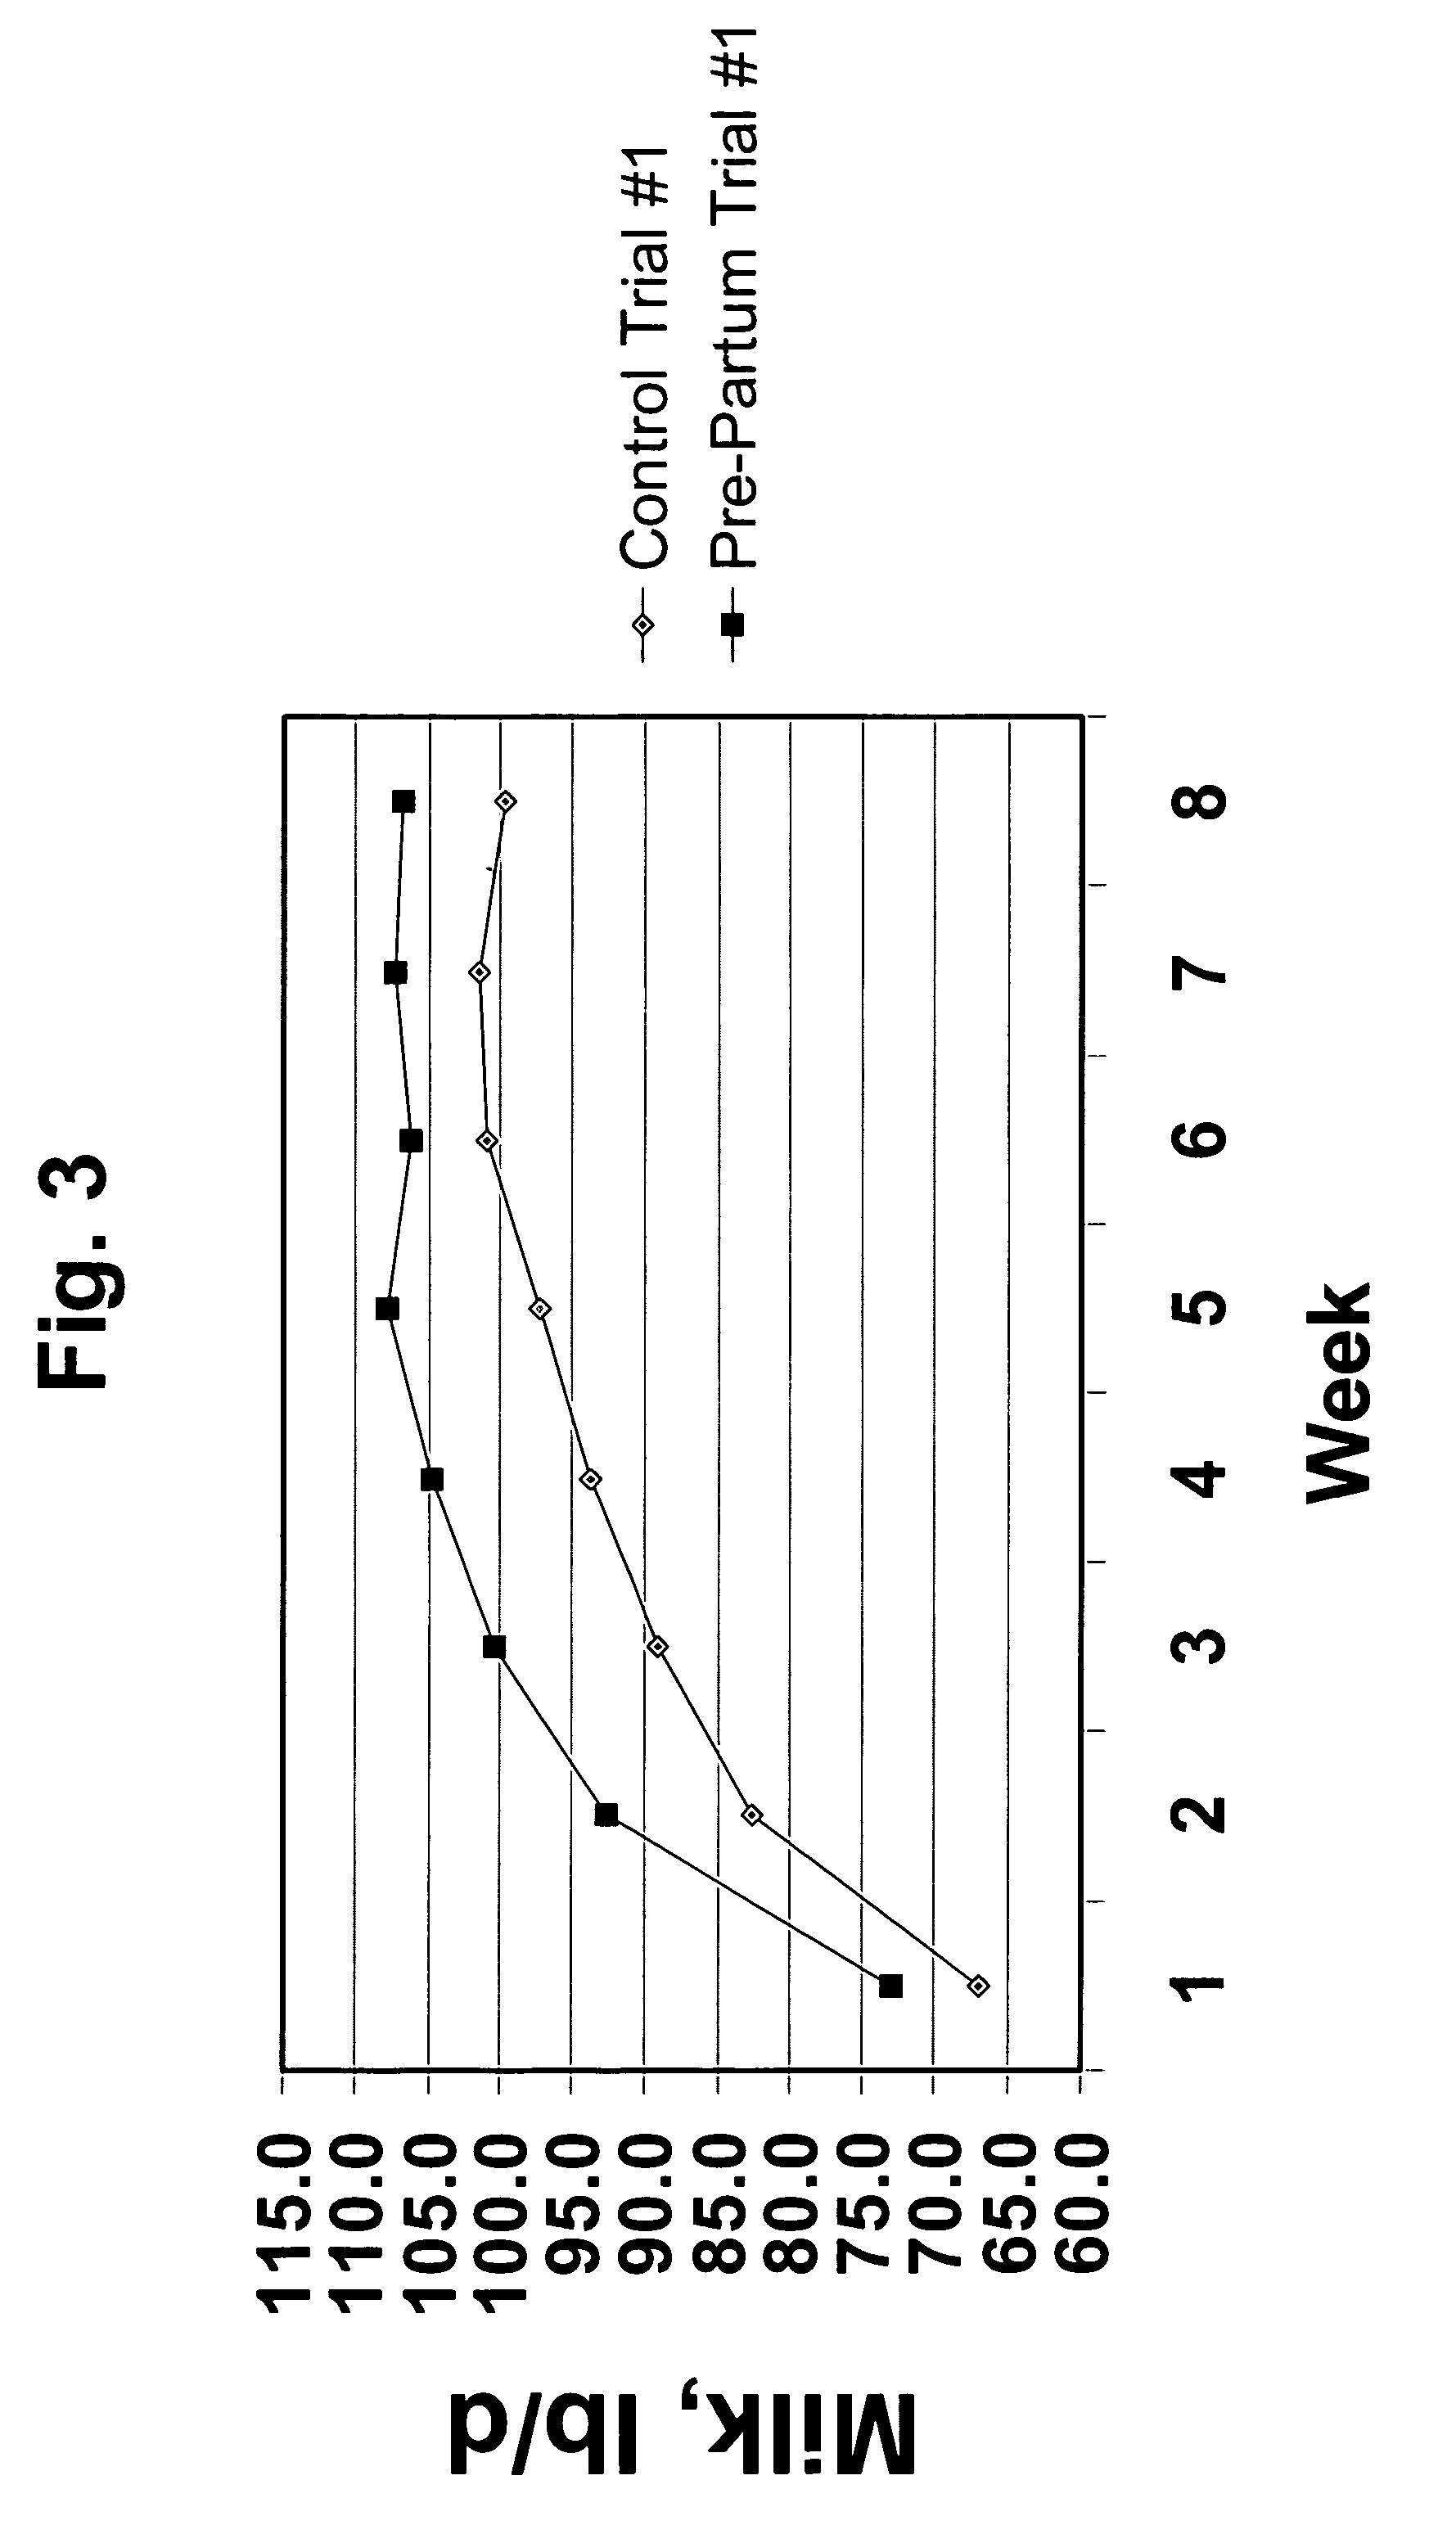 Method and composition for enhancing milk production and milk component concentrations